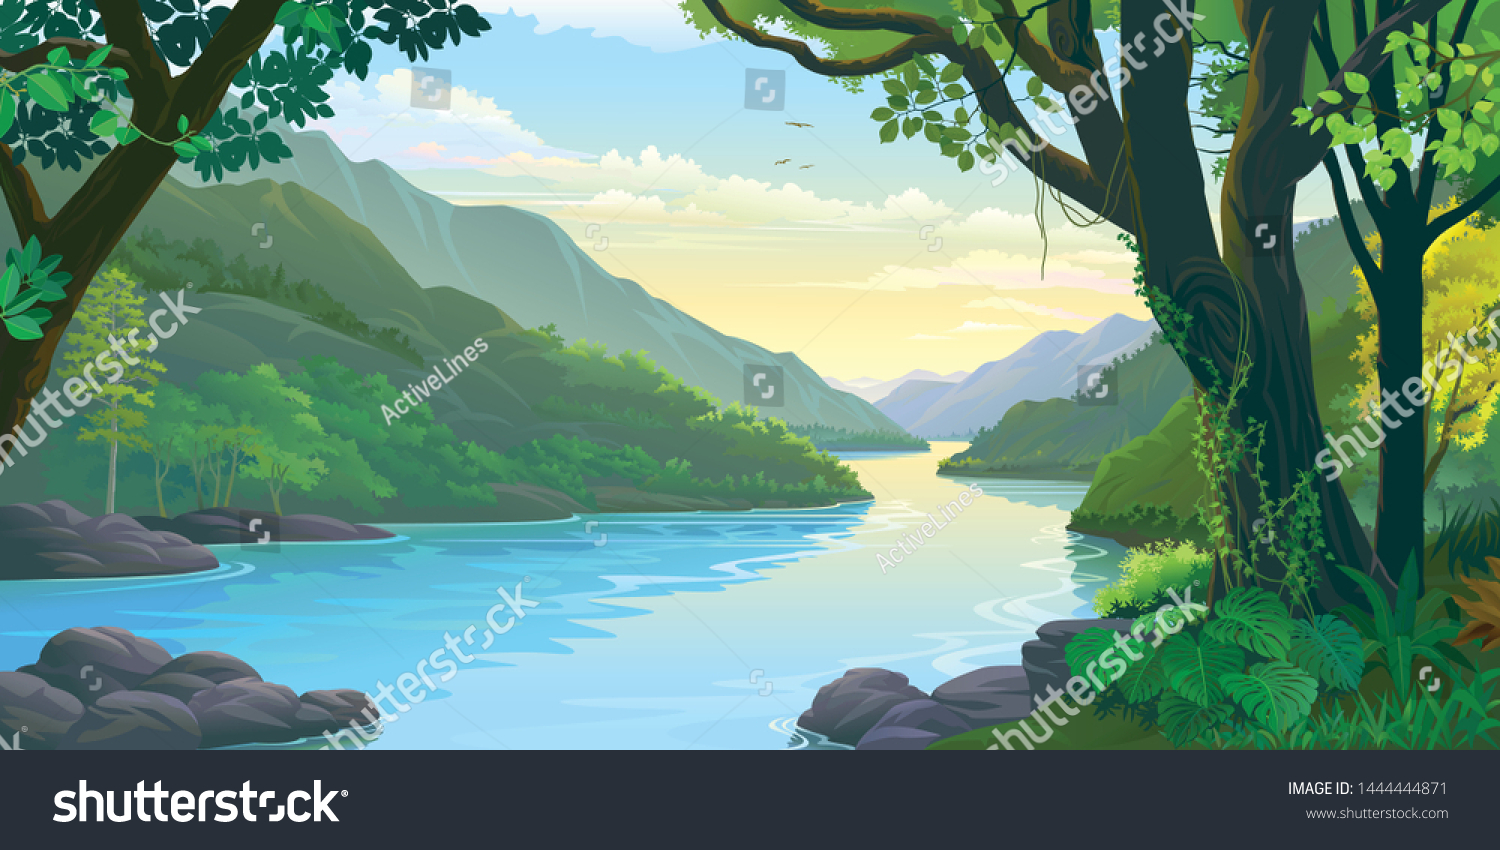 Natural window view of the river flowing calmly across dense green tropic forest